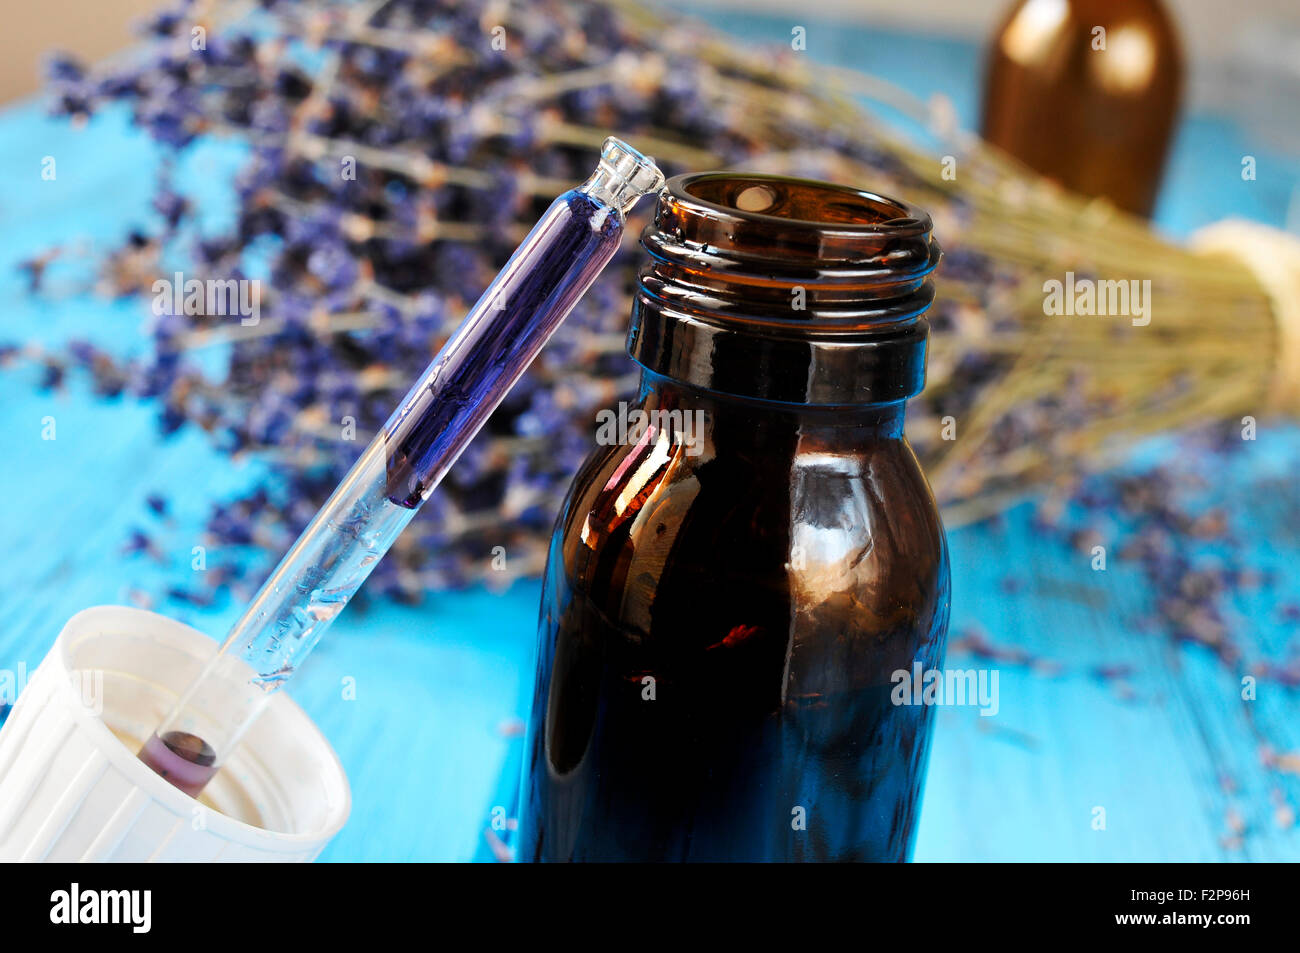 closeup of a dropper bottle with flower essence and a bunch of lavender flowers in the background, on a worn blue wooden surface Stock Photo